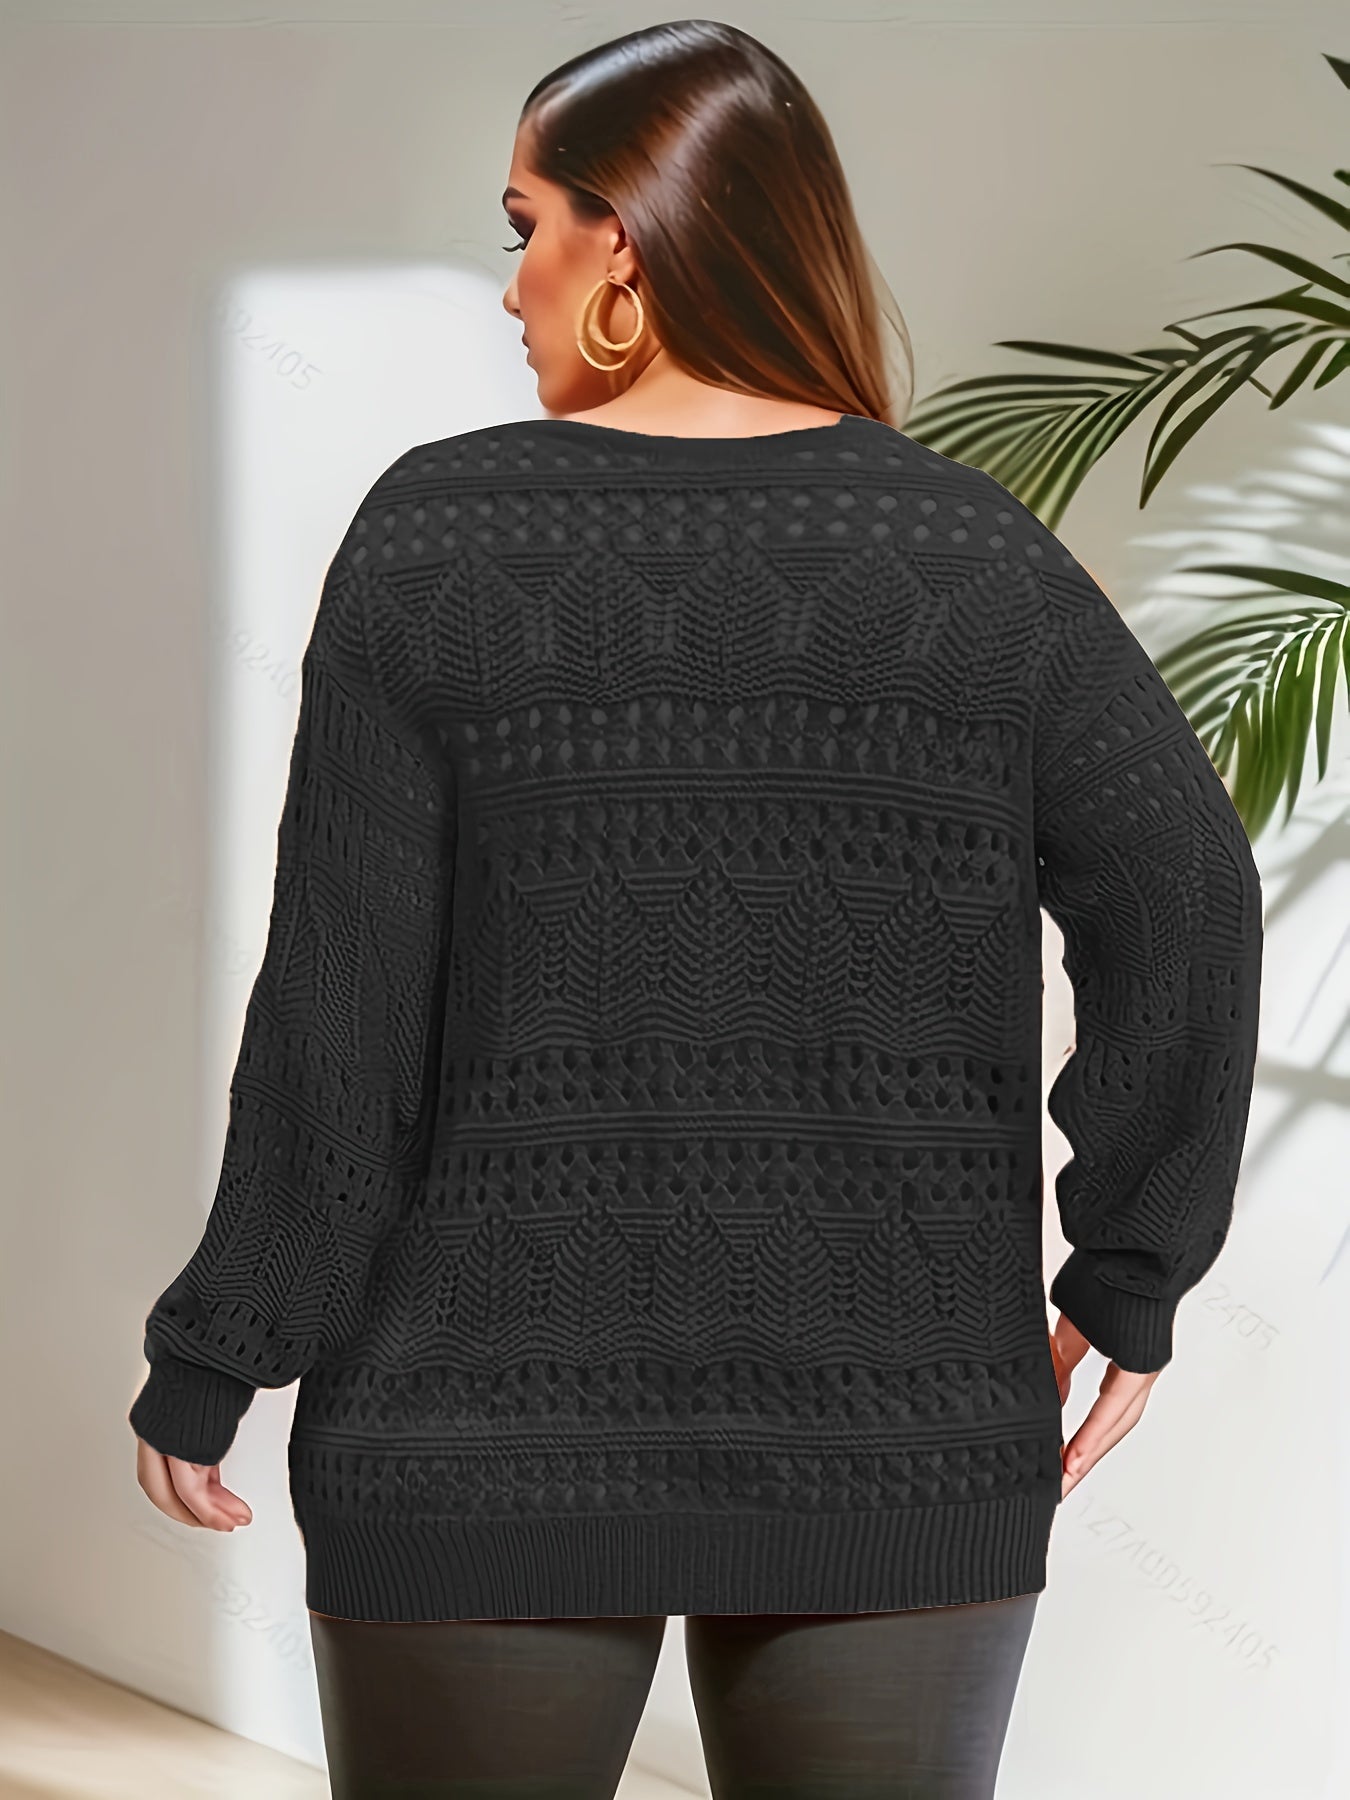 Plus Size Casual Knit Top, Women's Plus Solid Hollow Out Long Sleeve V Neck Sheer Pullover Sweater